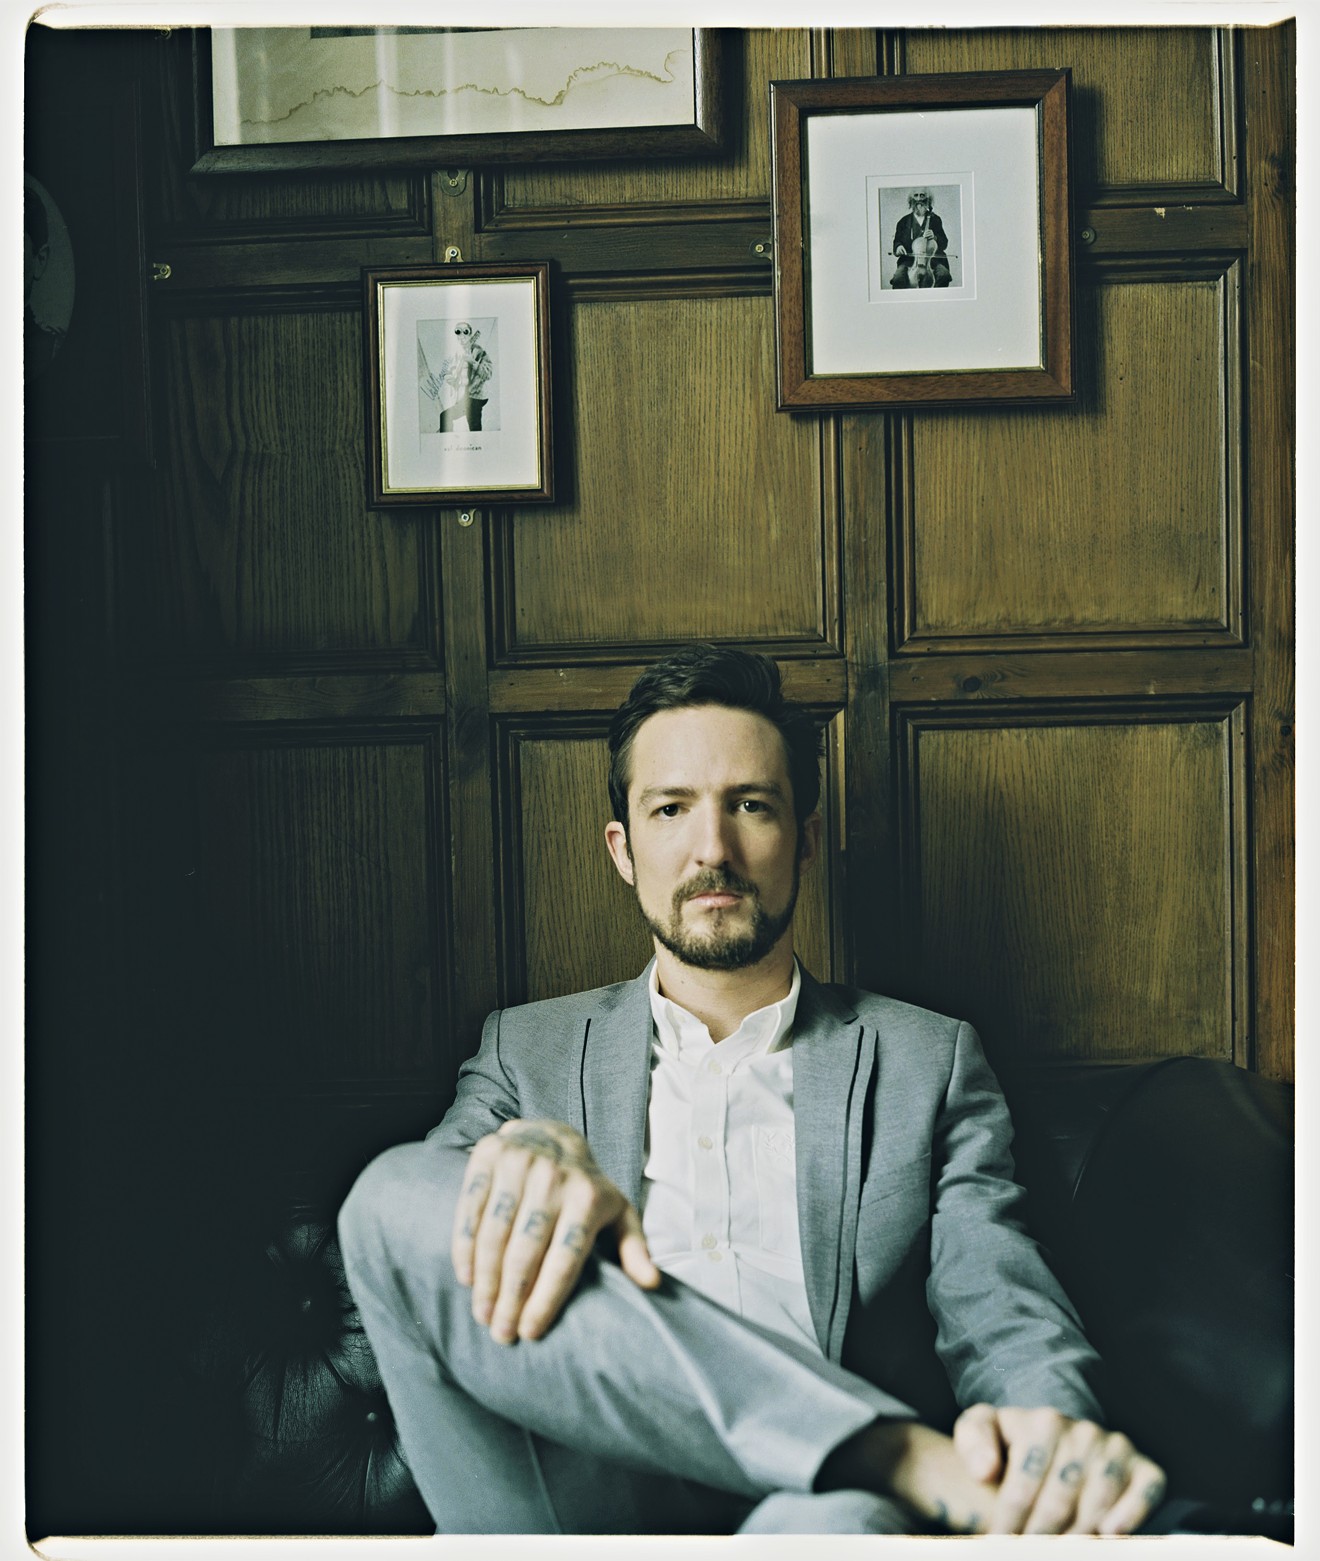 Frank Turner of Hampshire, England, is recording his seventh album a long way from home.